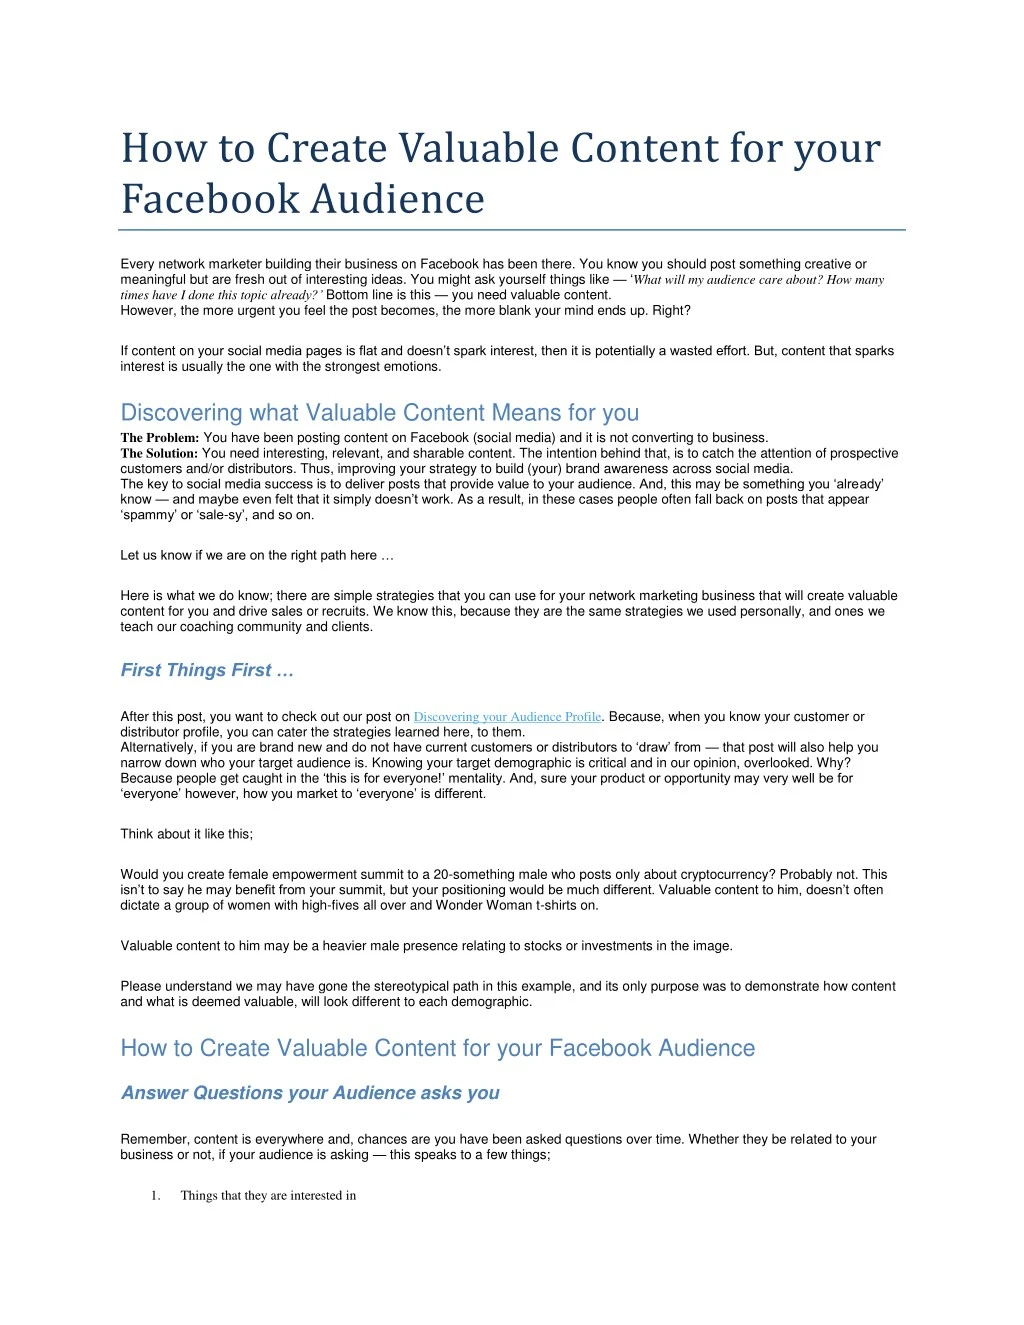 how to create valuable content for your facebook